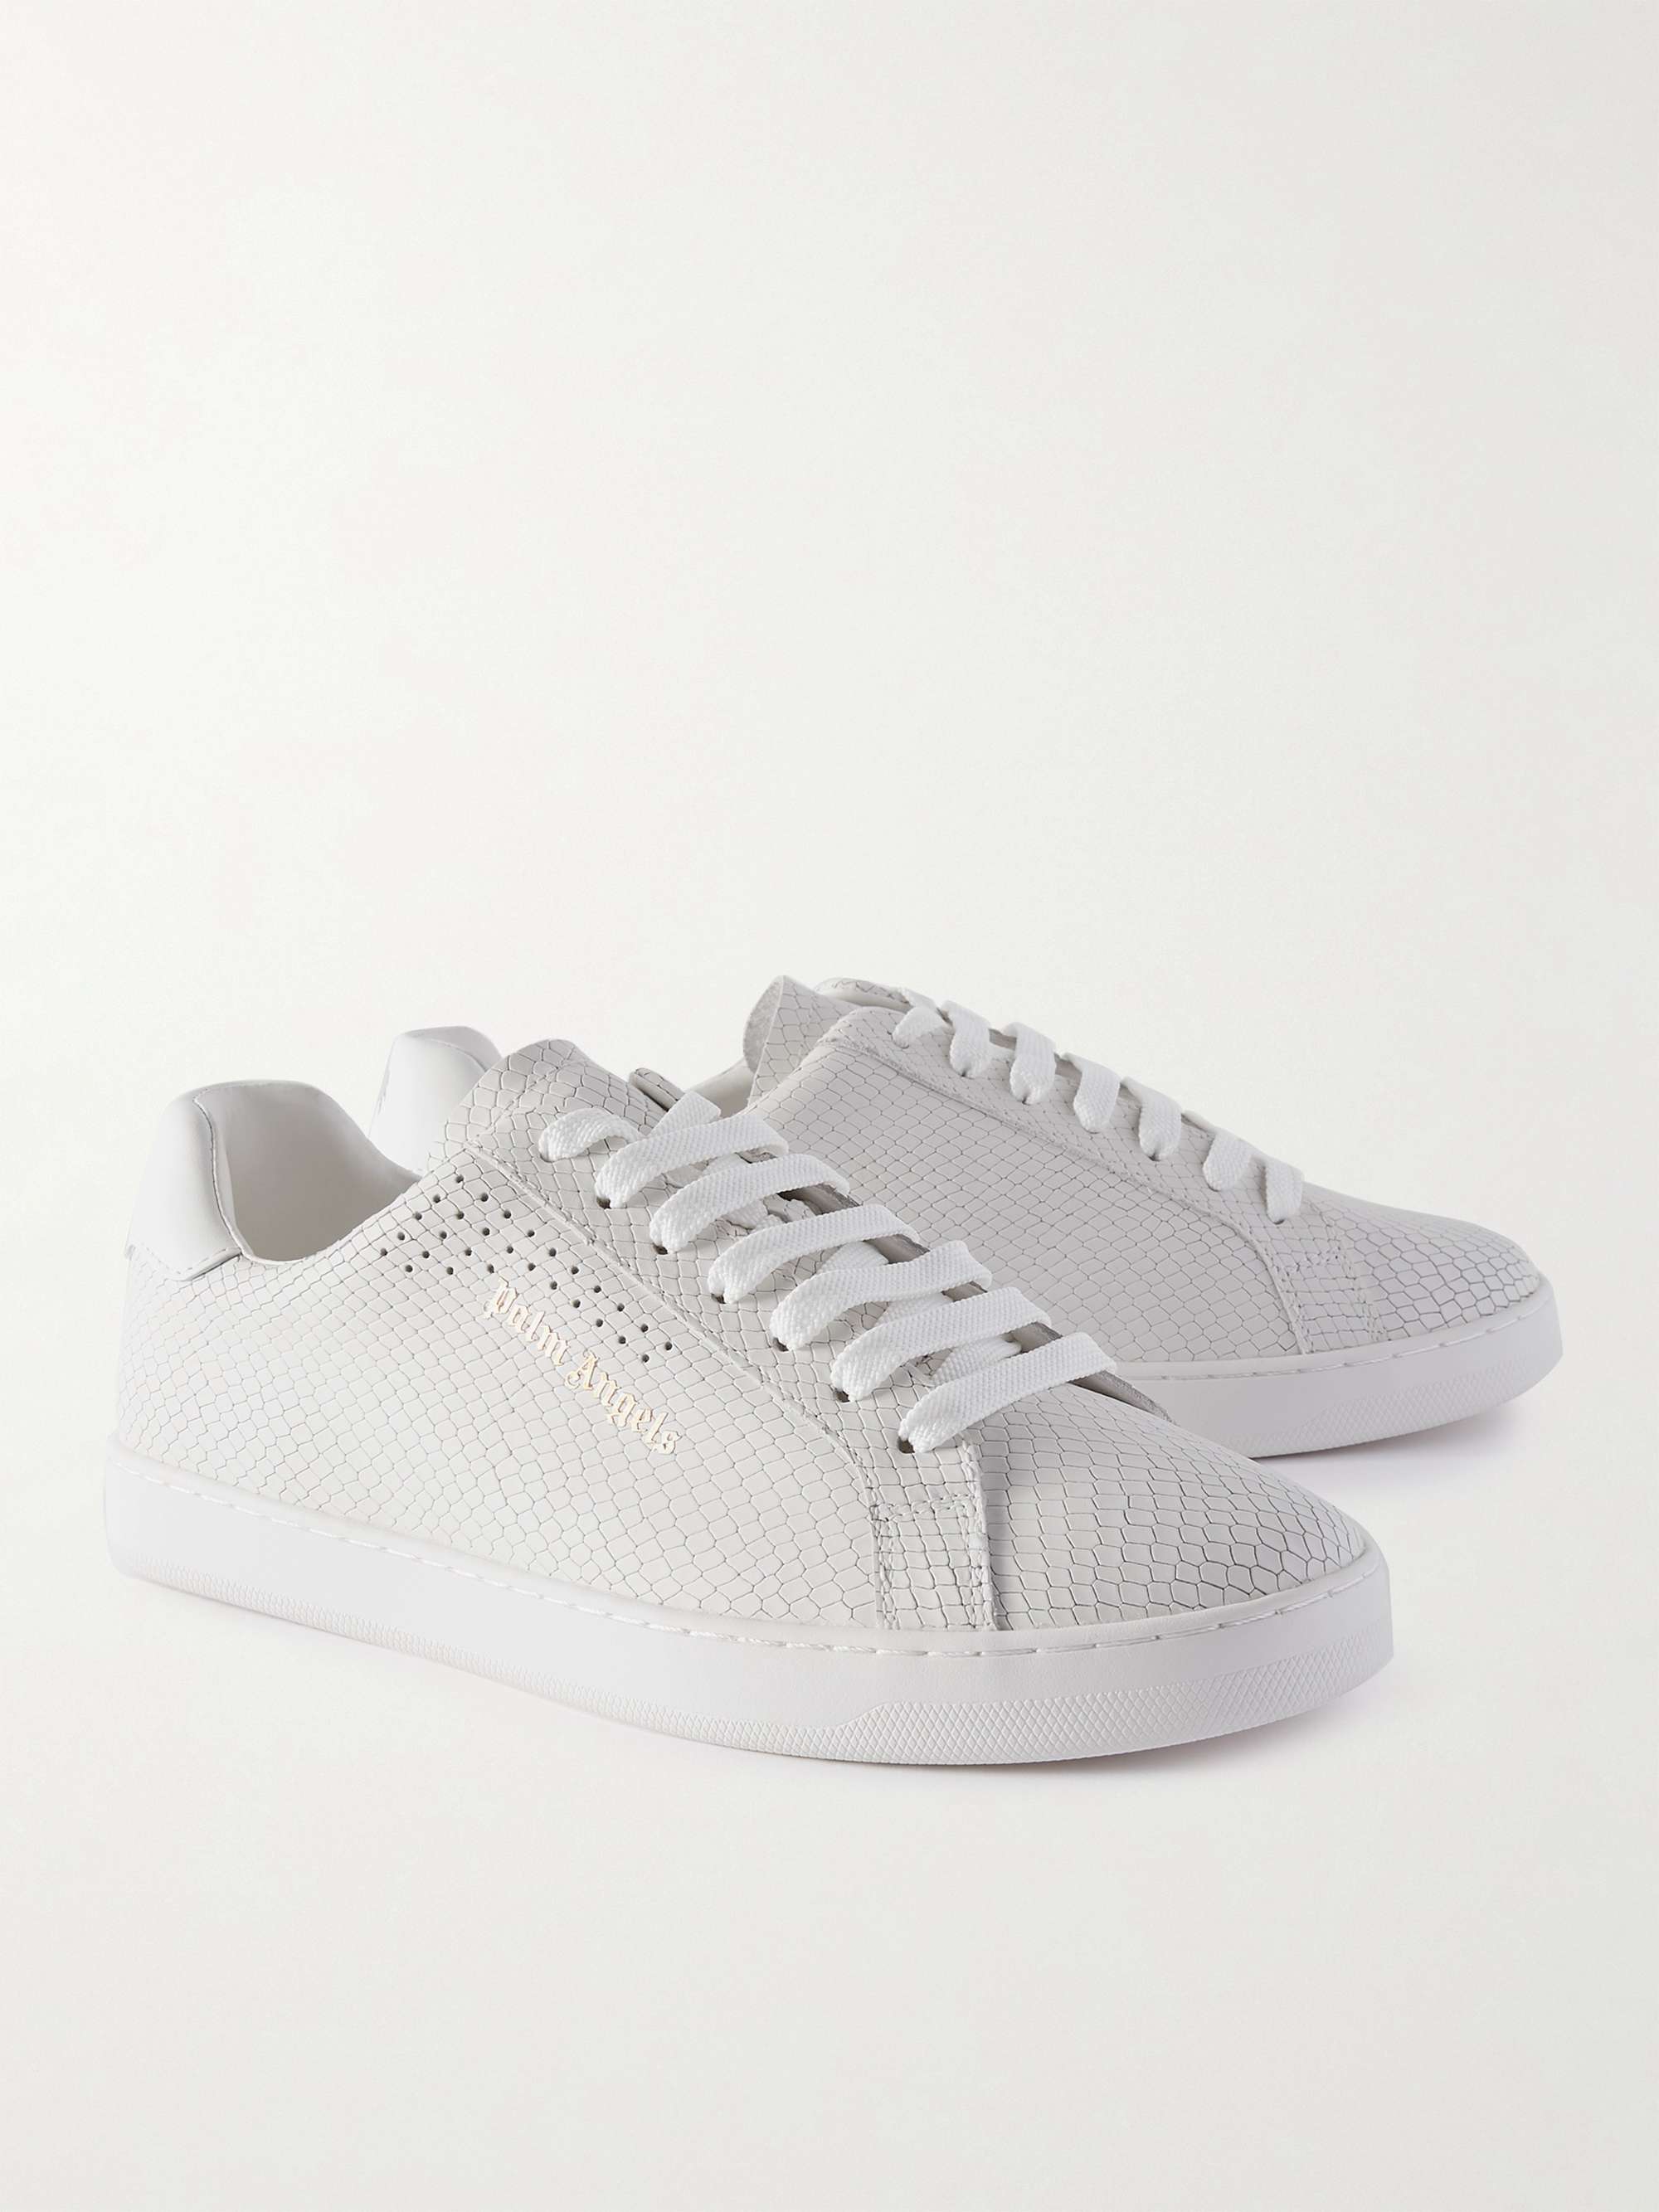 PALM ANGELS Snake-Effect Leather Sneakers | MR PORTER